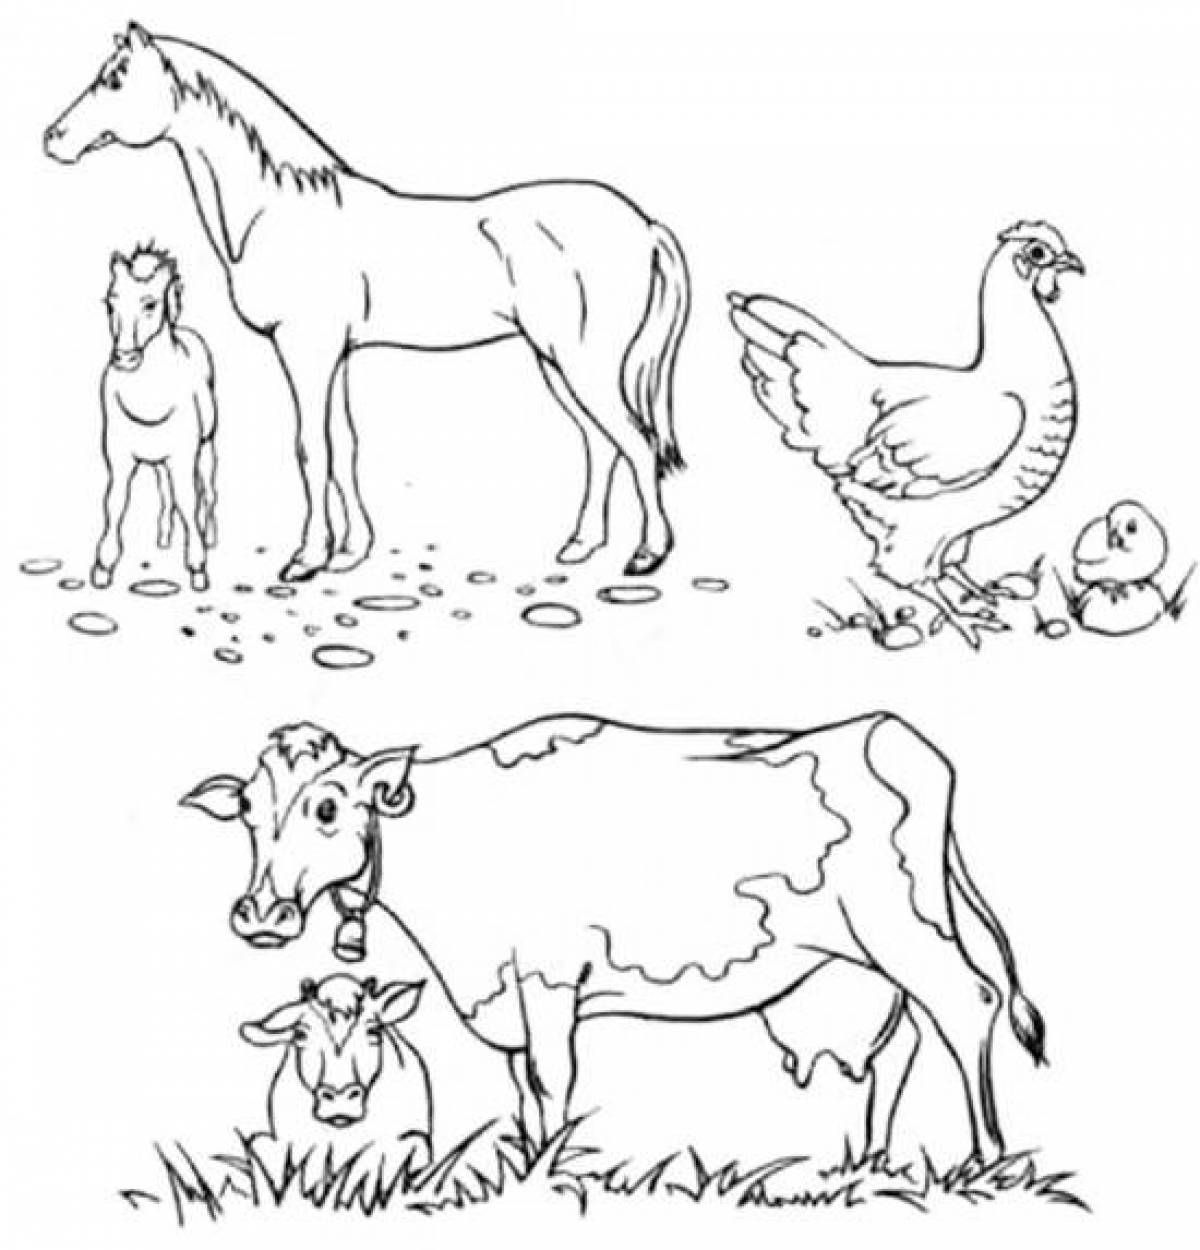 Outstanding pet coloring pages for 4-5 year olds